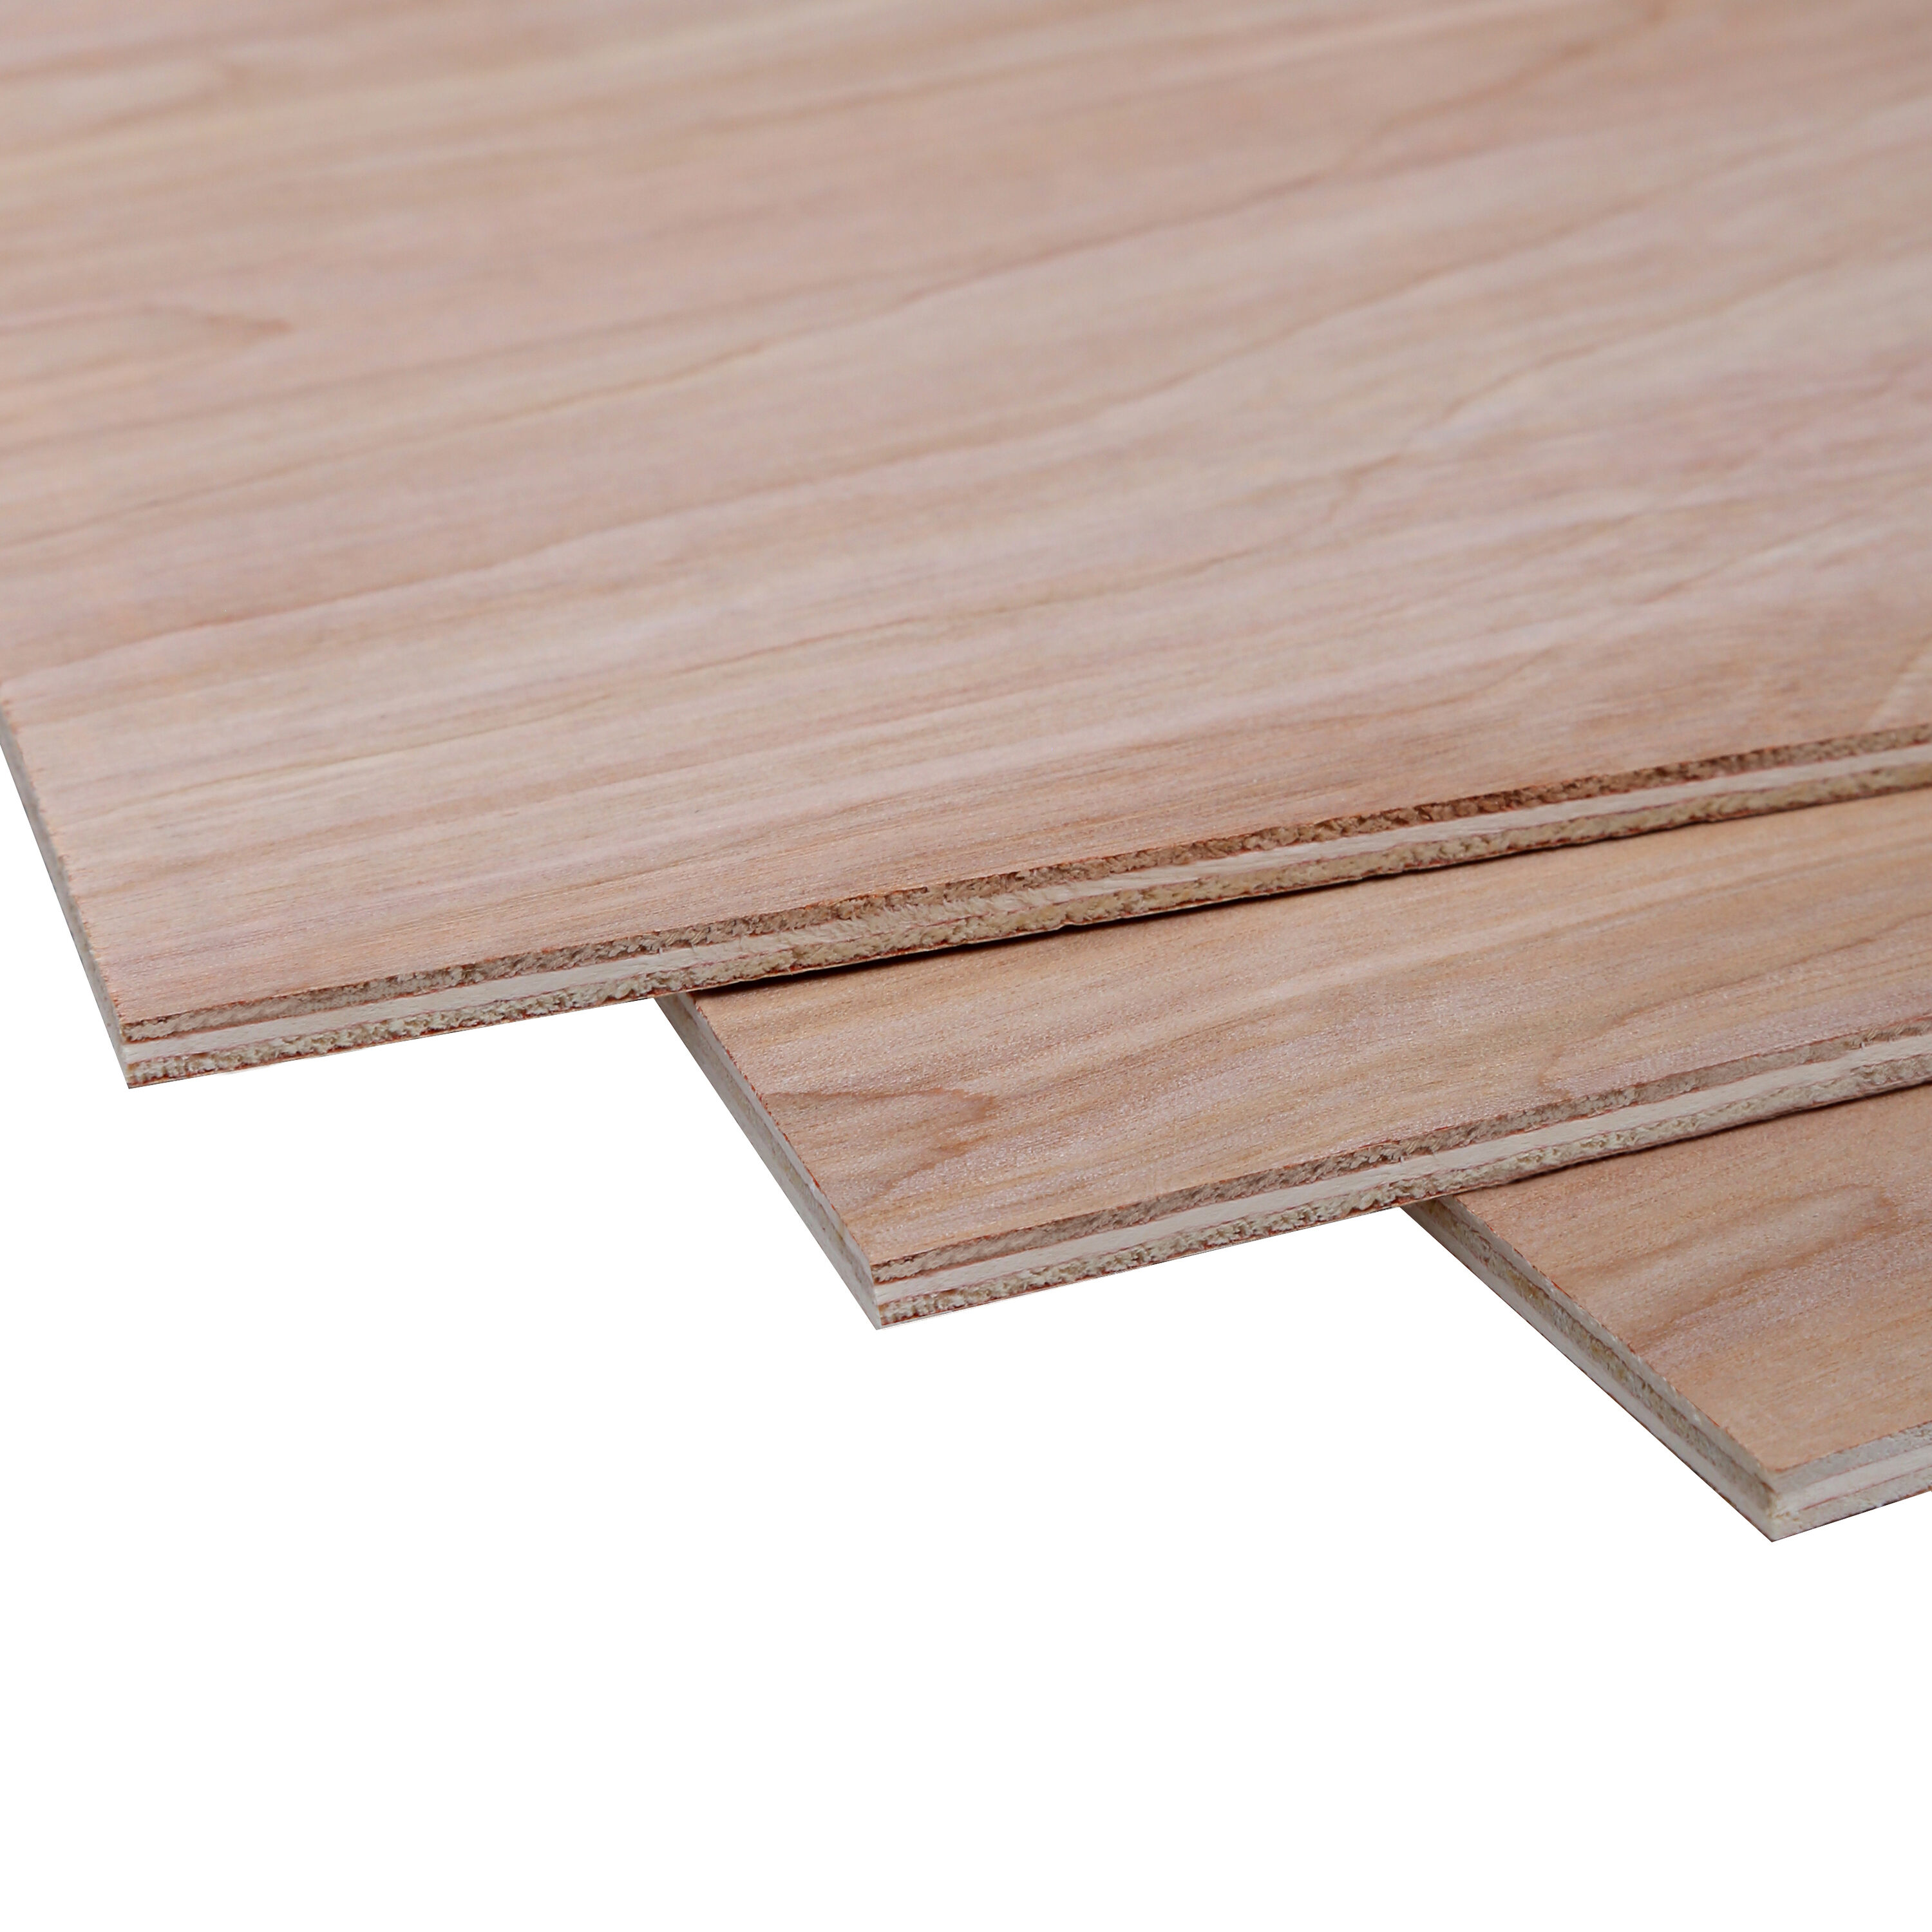 Plywood Squares - 2.5 inch (Package of 10) 1/4 Baltic Birch